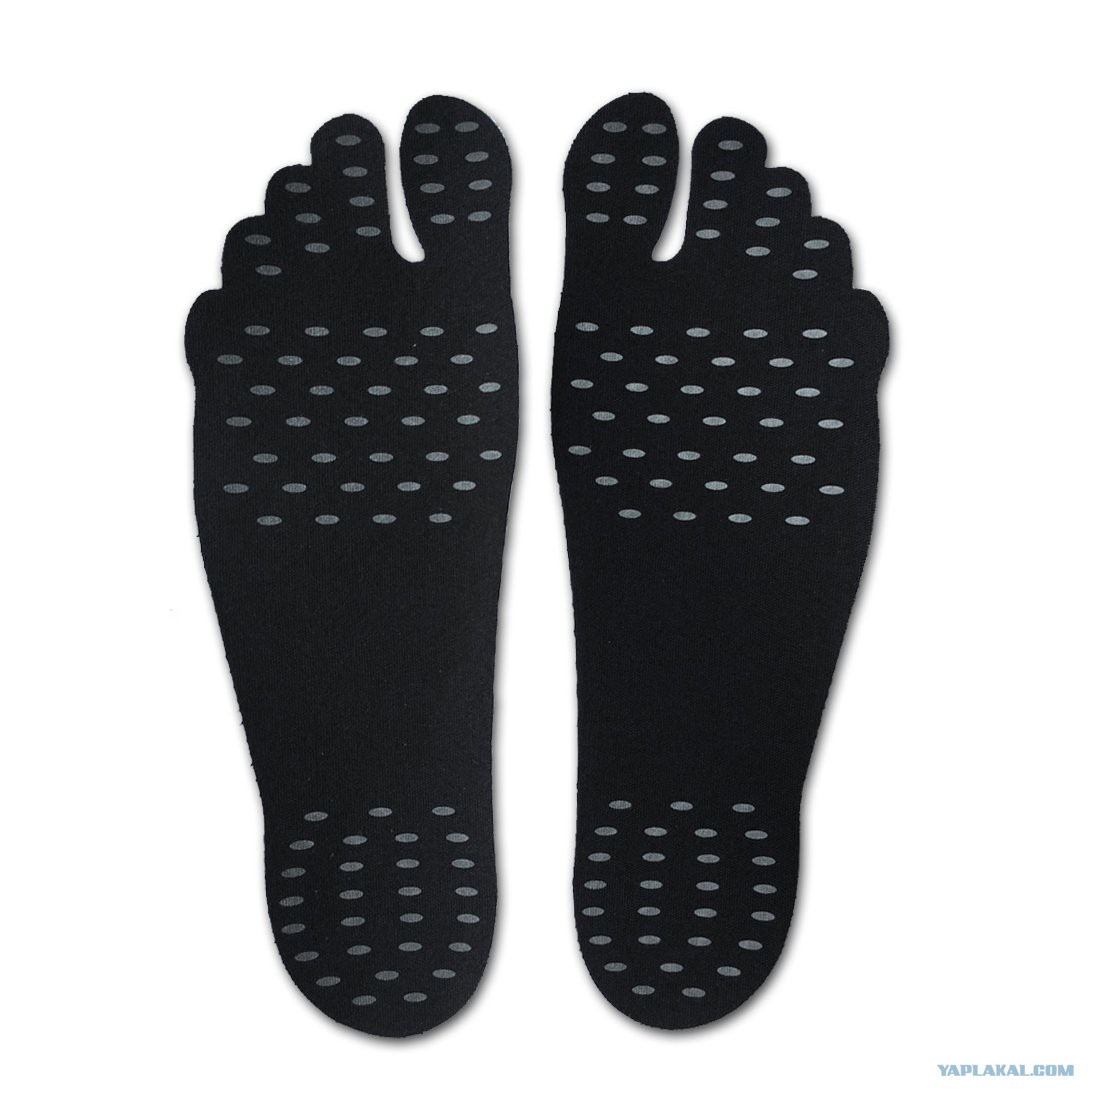 Nakefit. Sweat Pads Size XL. Kpw248 foot Pad Worship. One(1) pair of sole. Foot stick